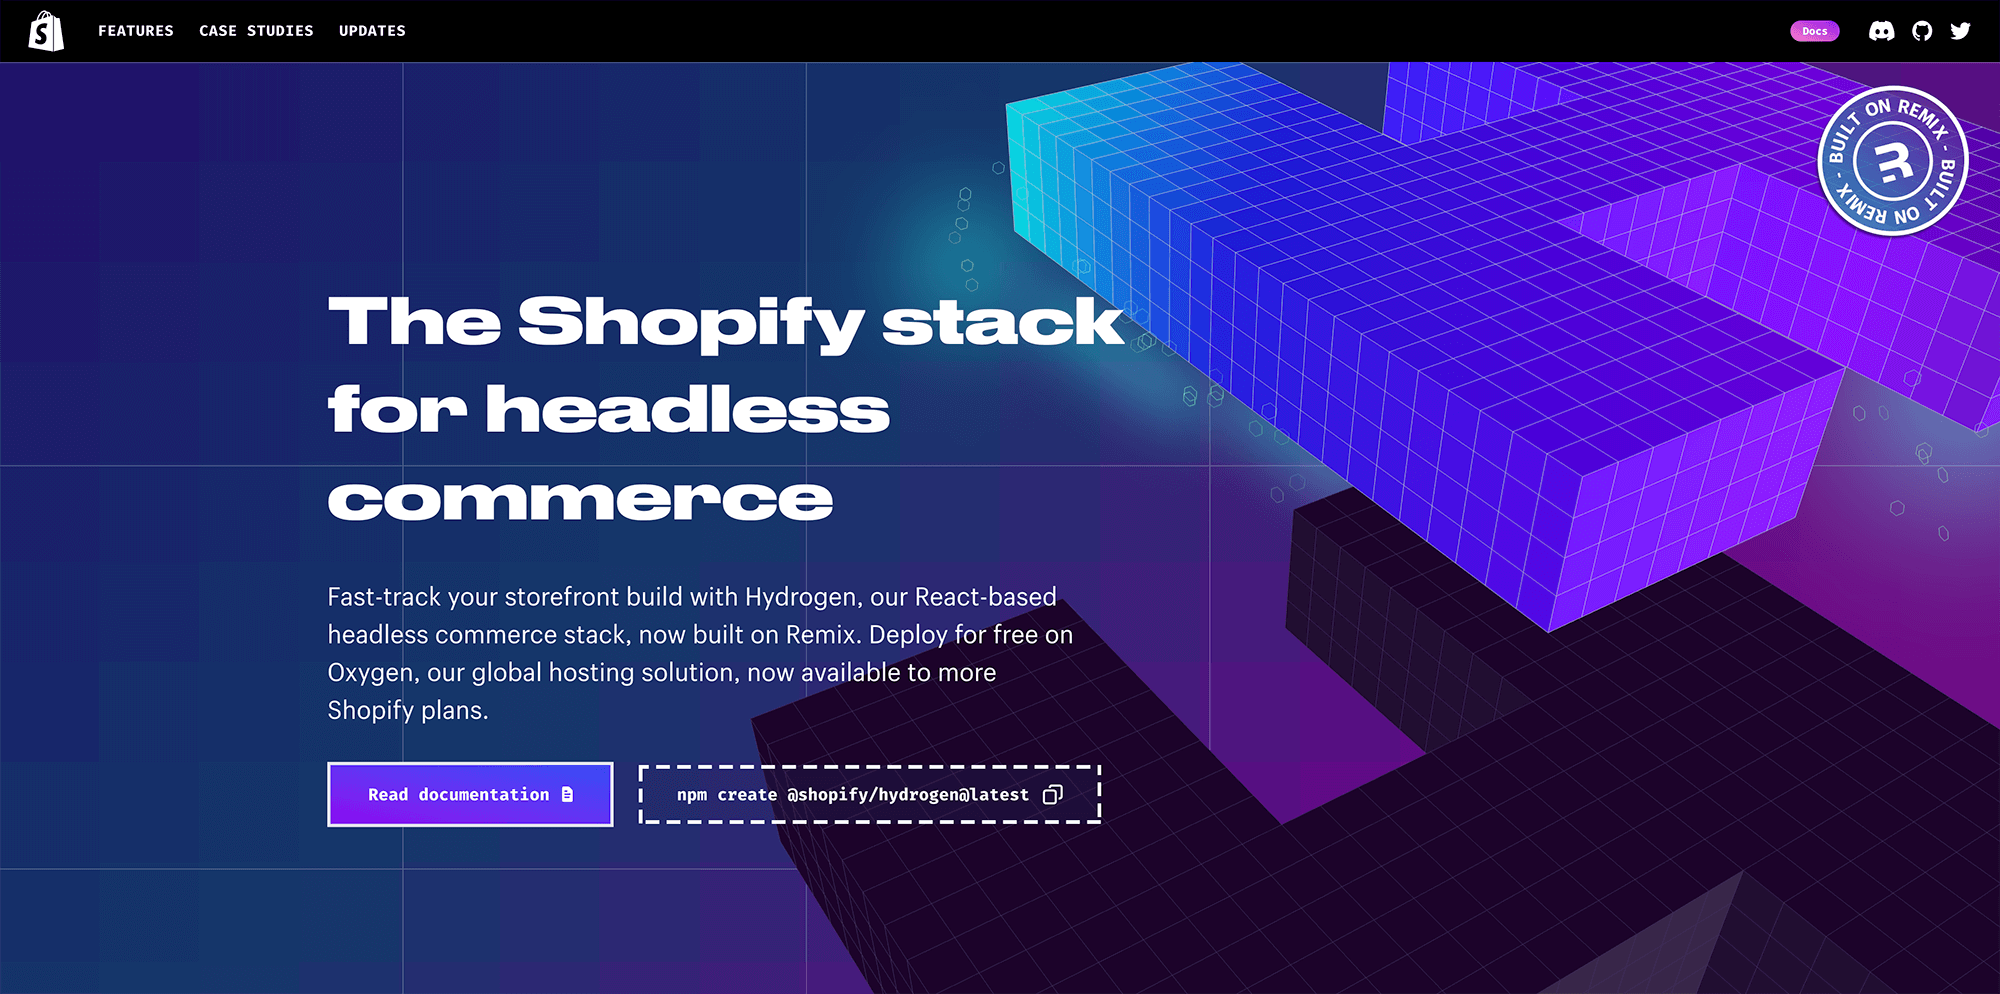 Hydrogen: The Shopify stack for Headless